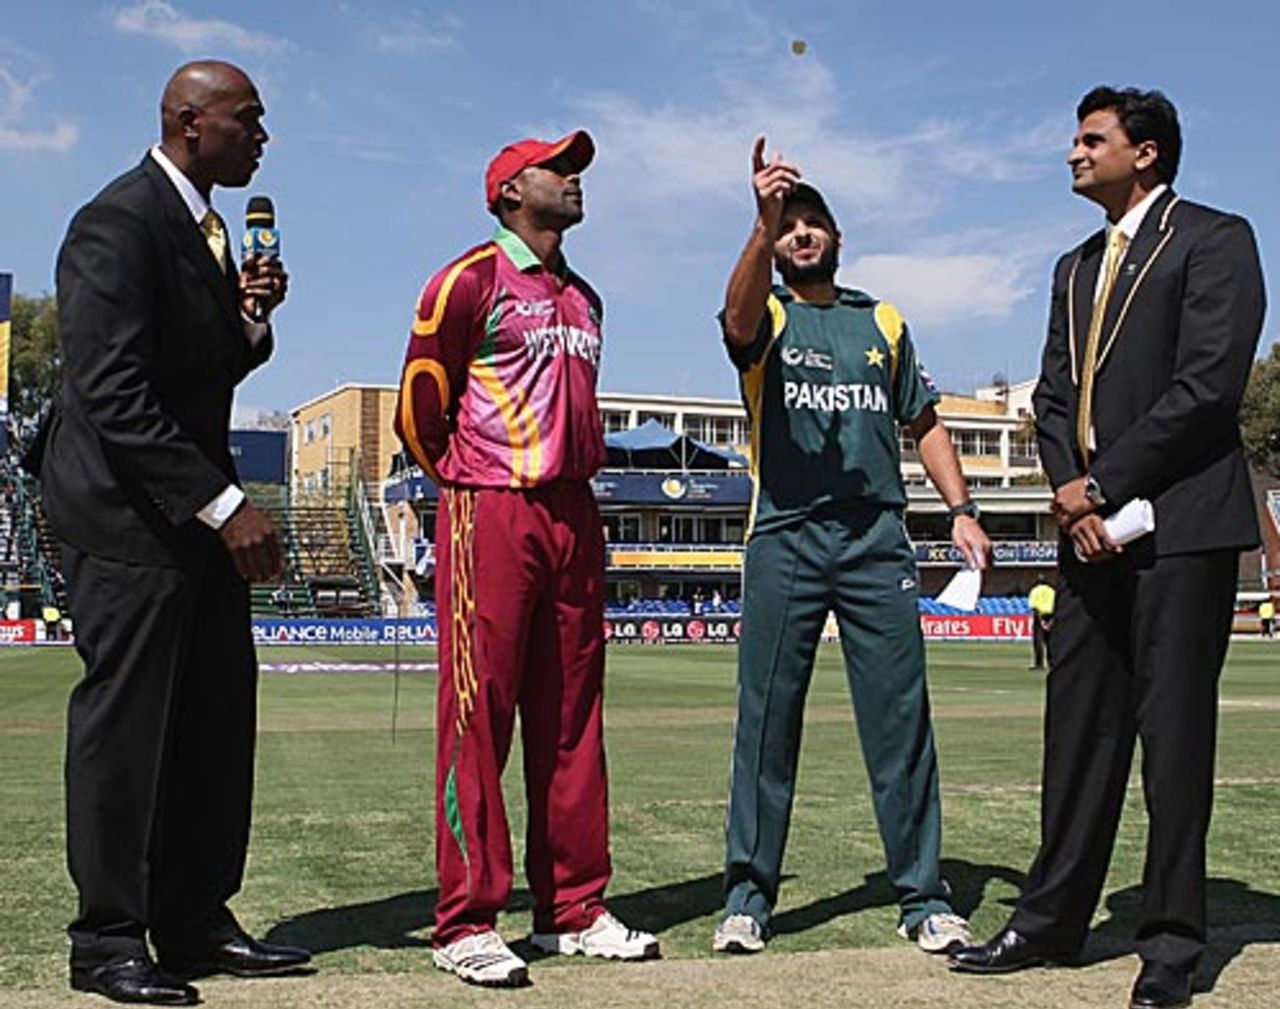 Floyd Reifer looks on as Shahid Afridi tosses the coin, Pakistan v West Indies, Champions Trophy, Group A, Johannesburg, September 23, 2009